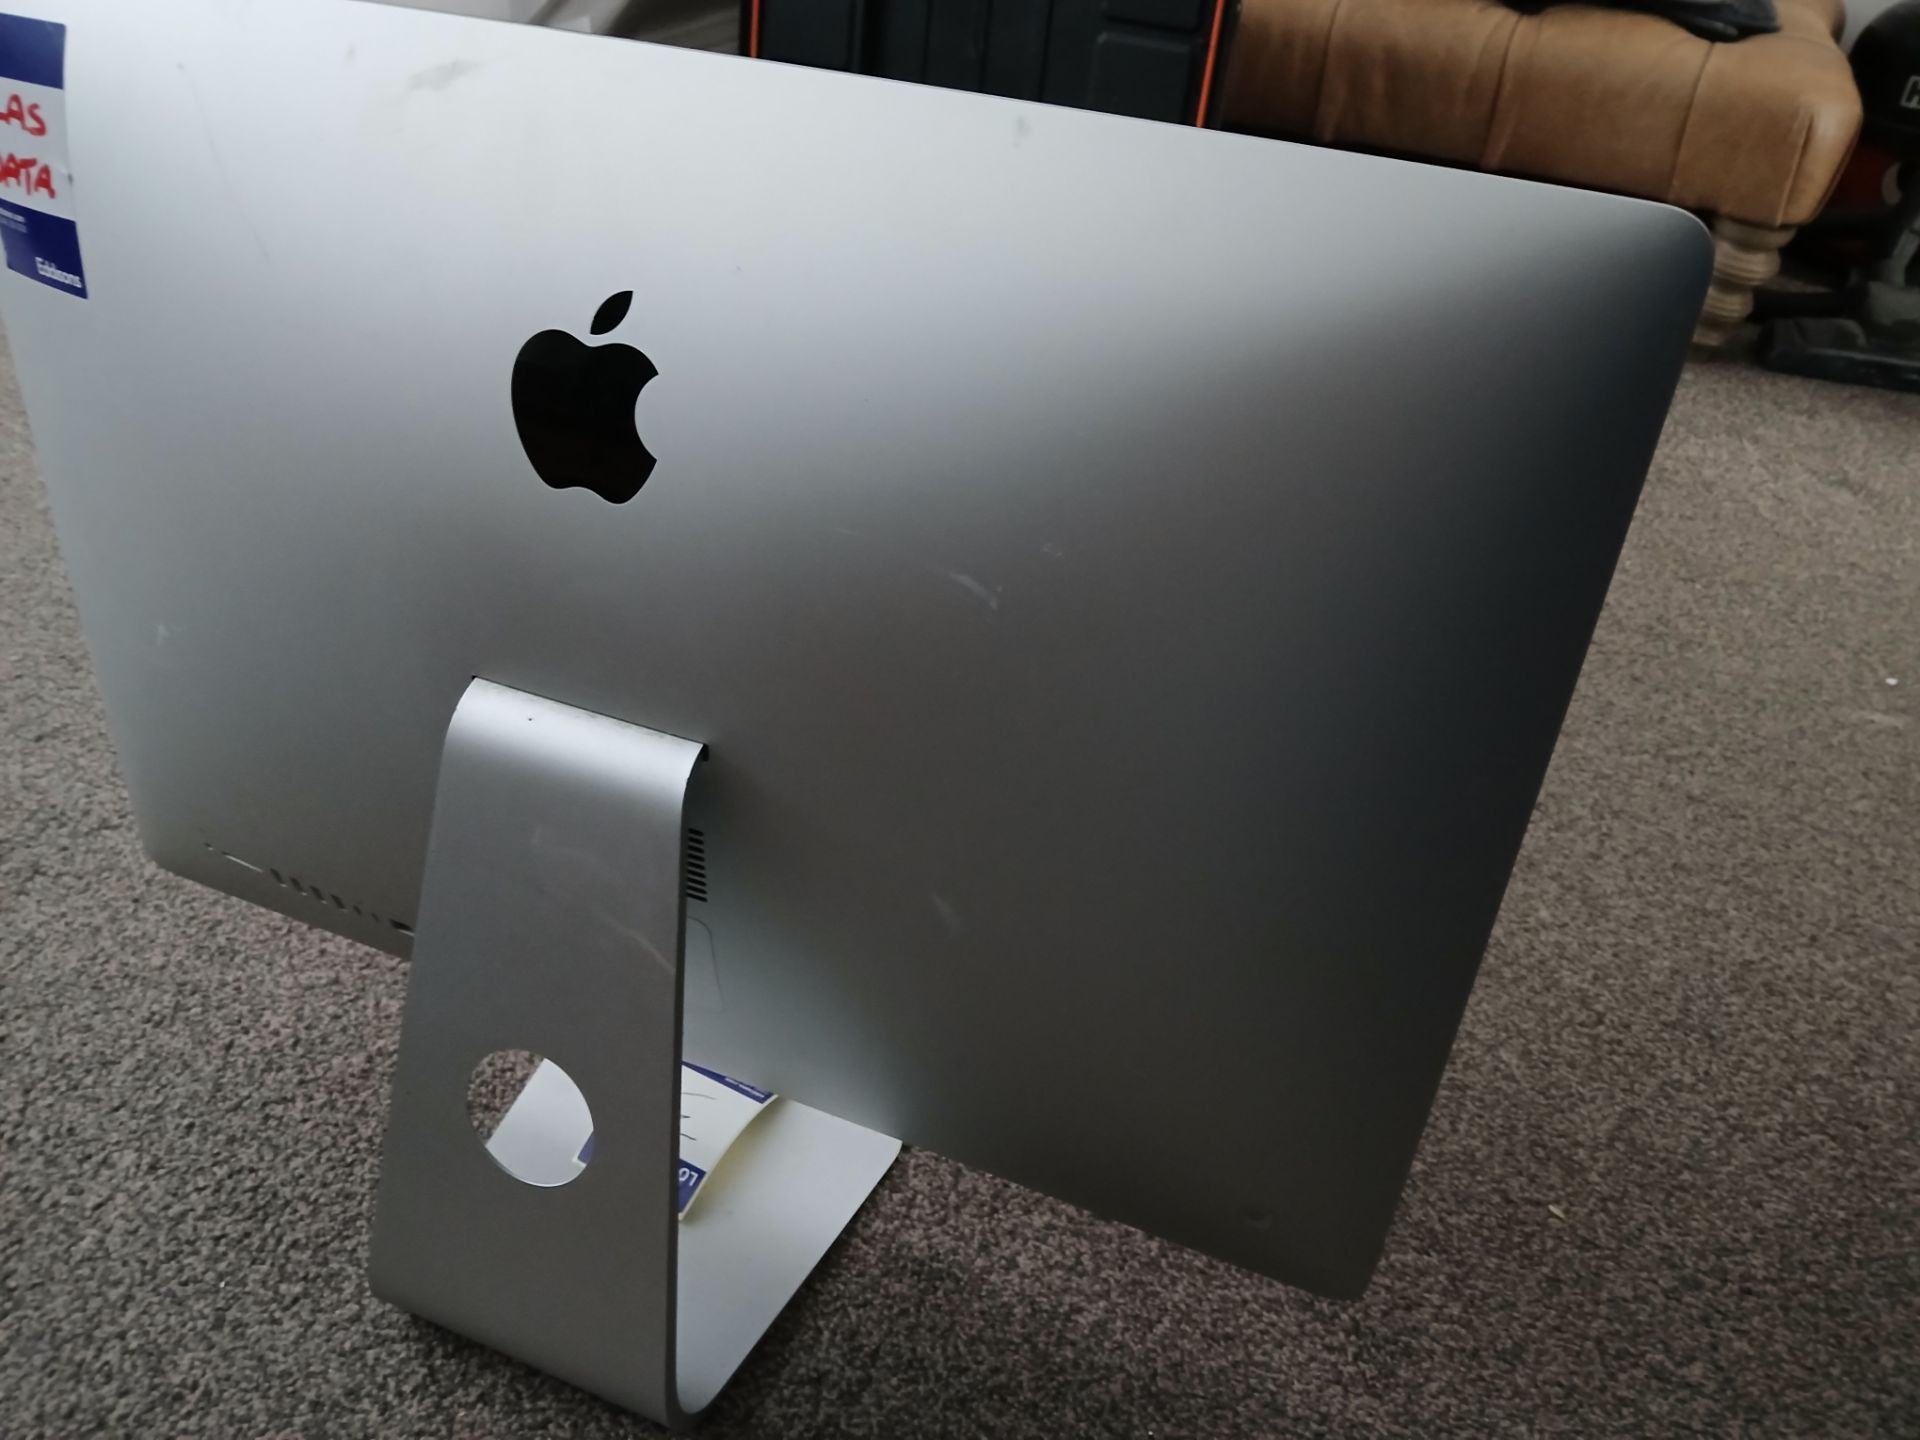 Apple iMac (Retina 5K, 27”, 2017), Serial Number C02YD0AQJ1GP (iMac only, no mouse, keyboard, or - Image 6 of 6